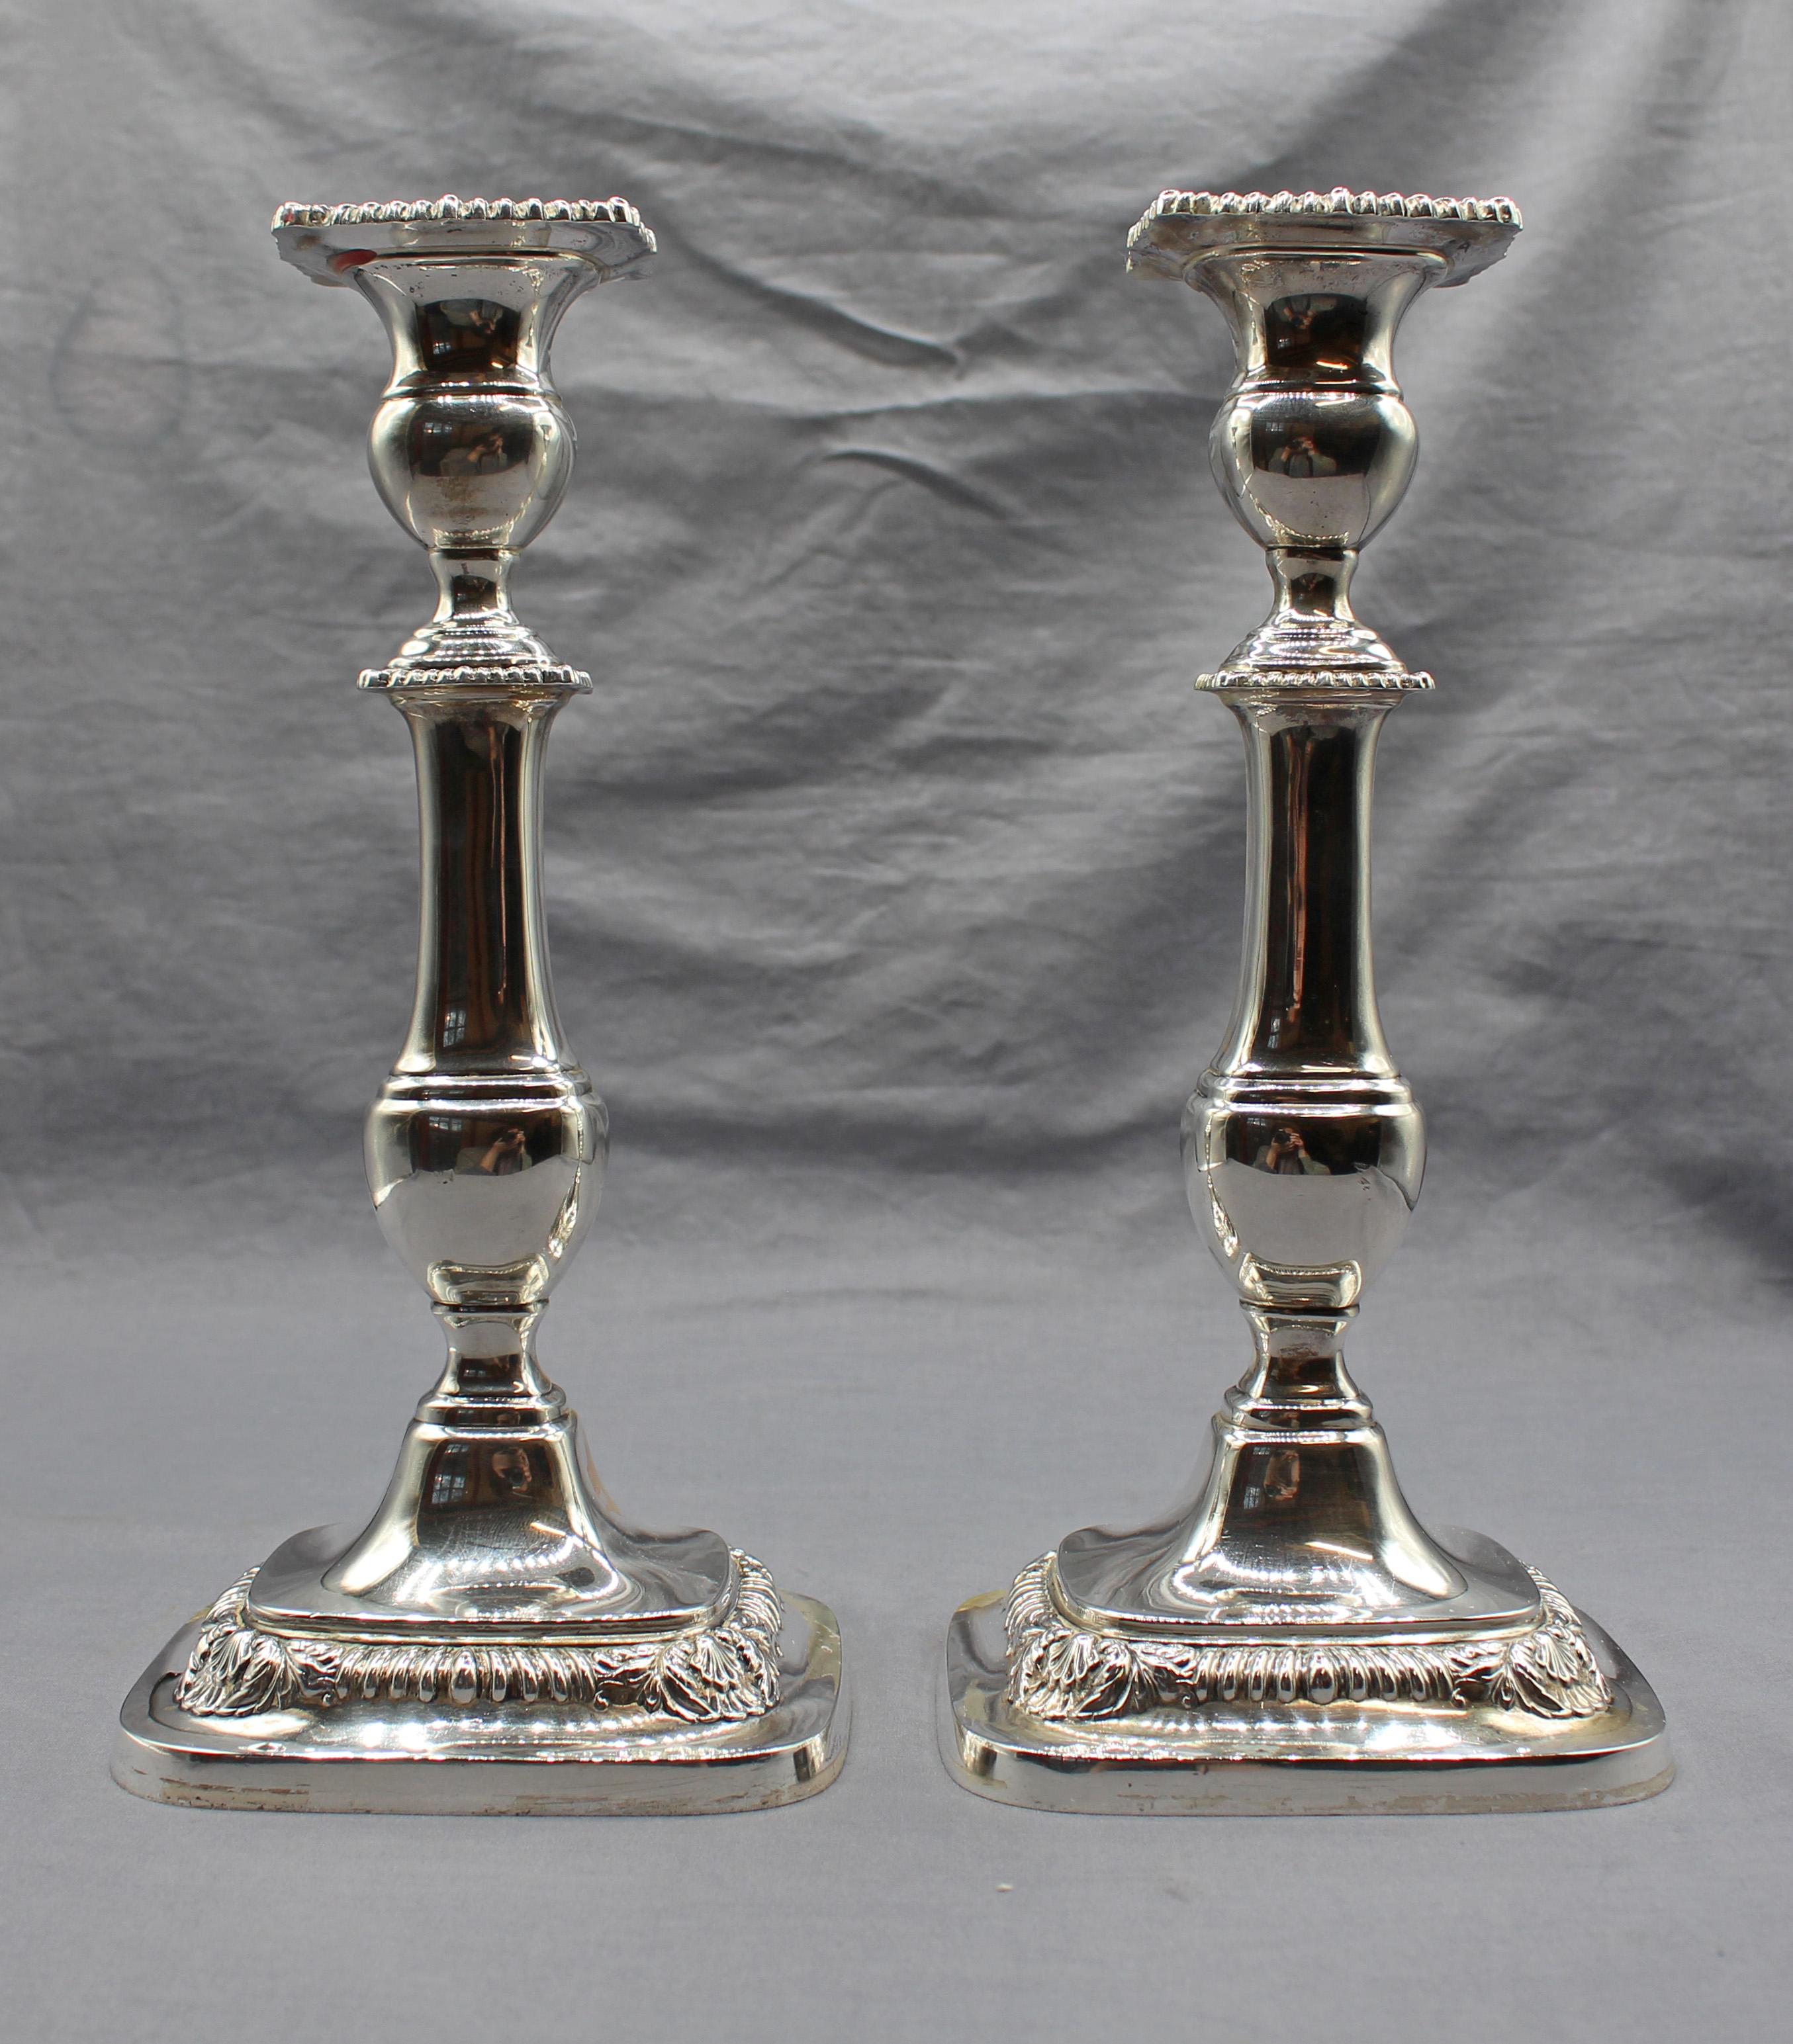 Mid-20th century pair of sterling silver candlesticks, Lord Robert pattern by International. Weighted bases. Shell & gadroon motif.

10 3/4